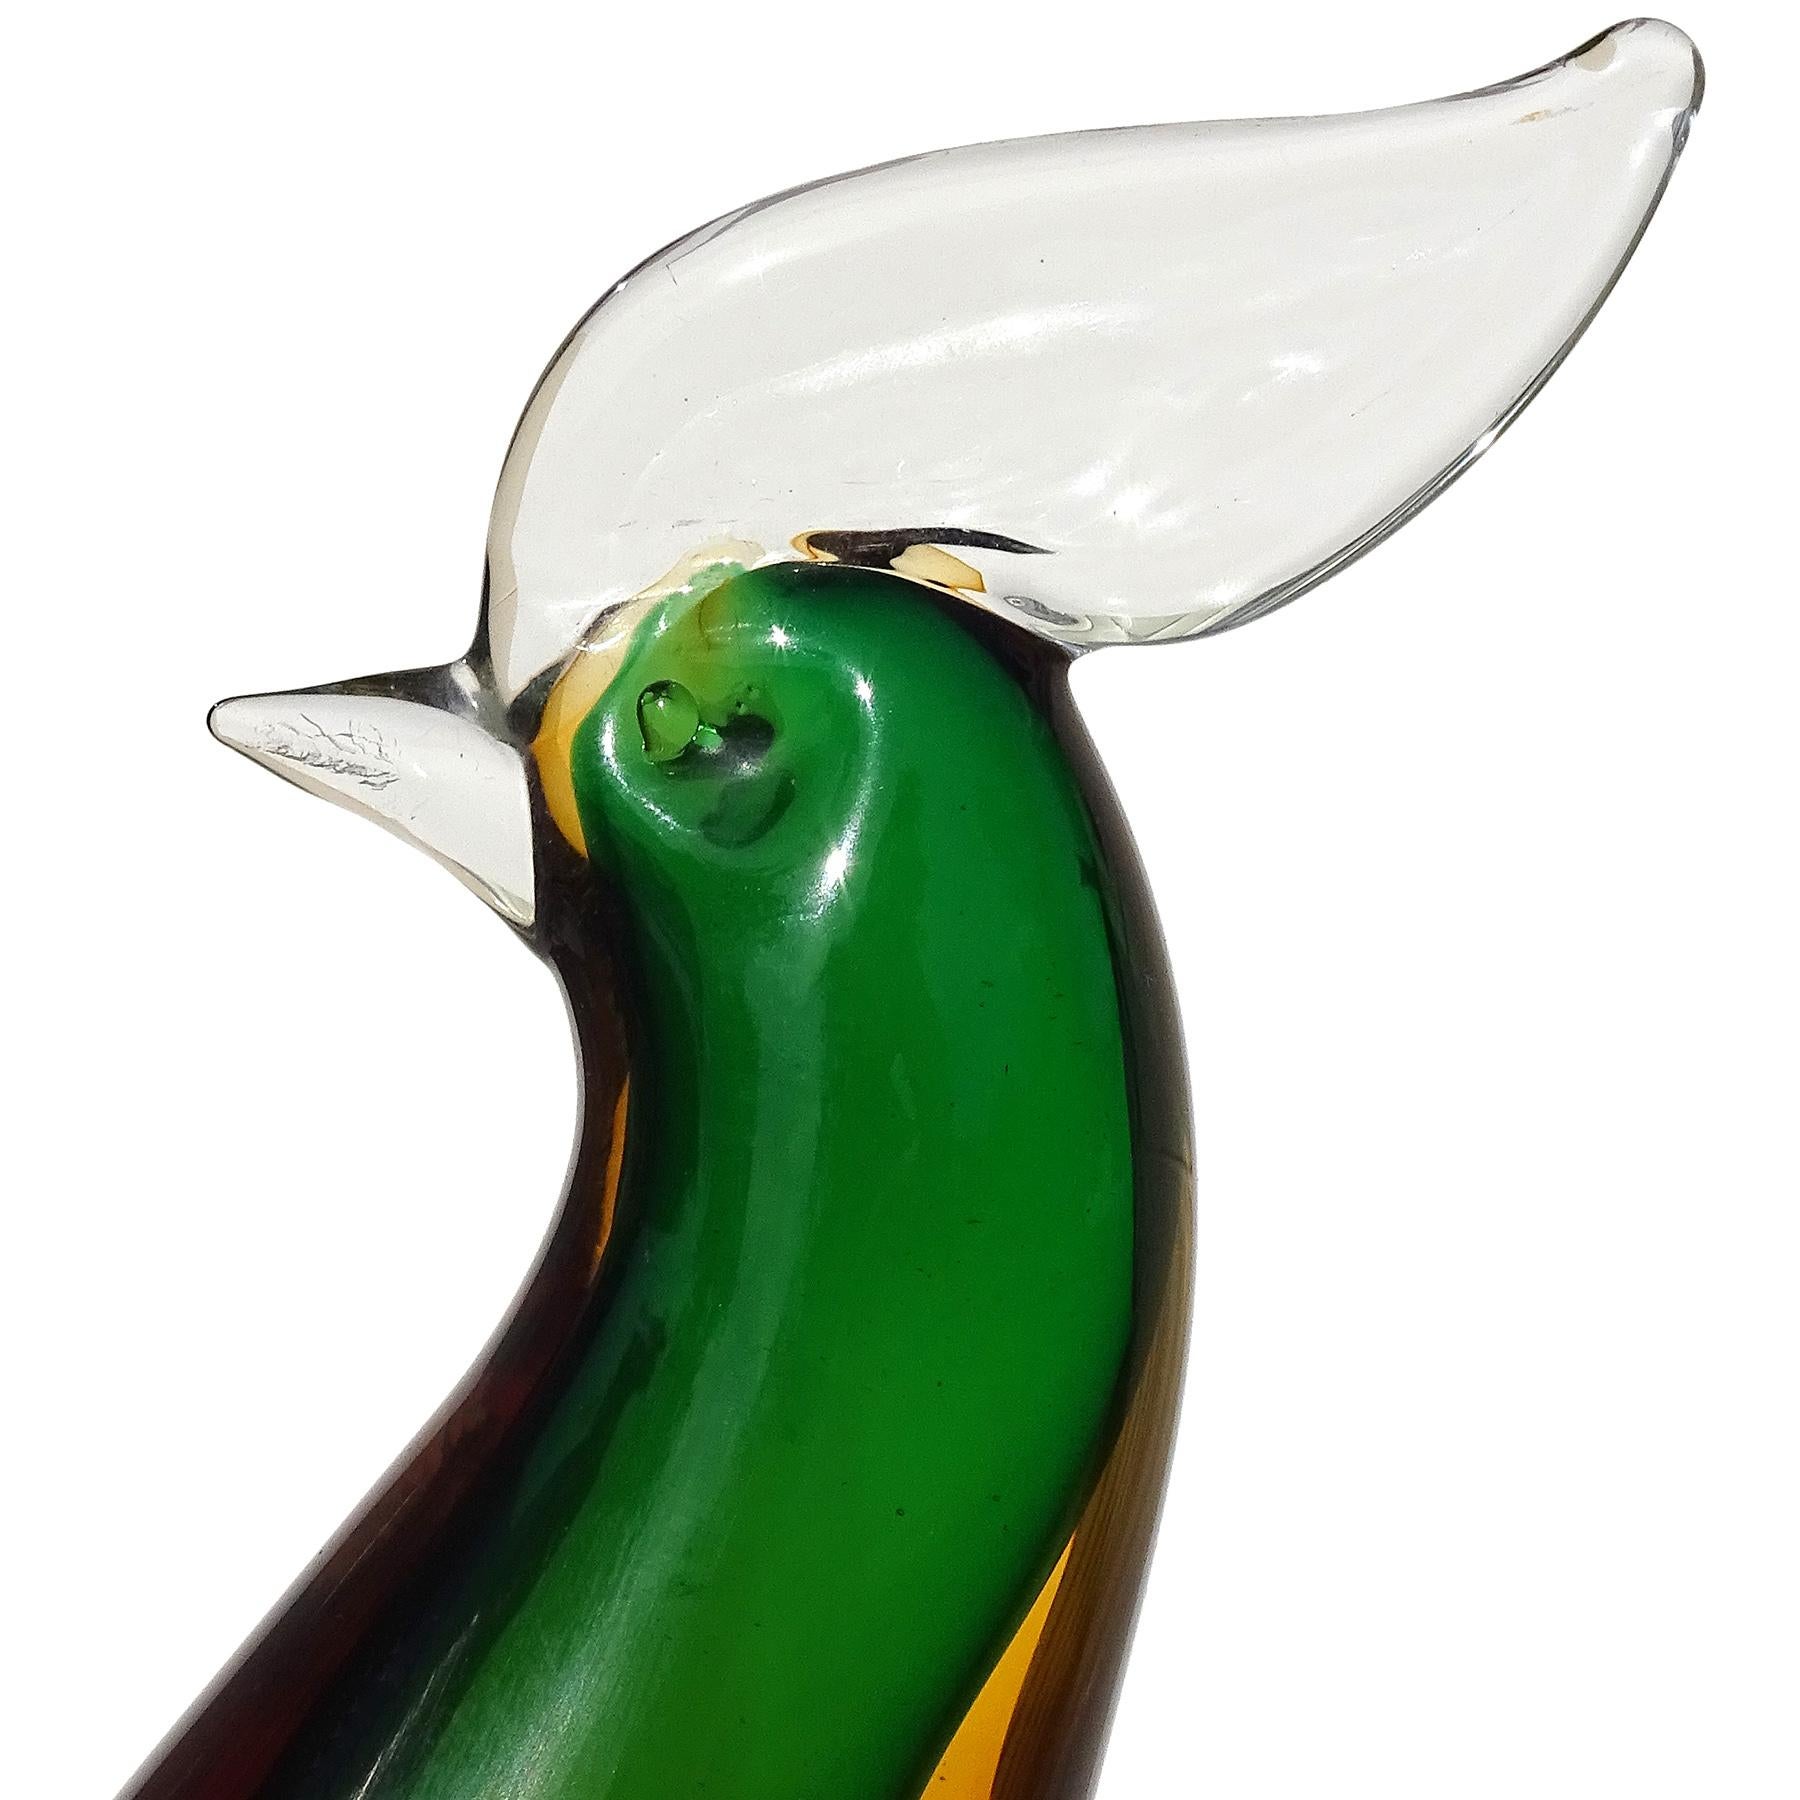 Beautiful vintage Murano hand blown Summerso orange, green and gold flecks Italian art glass bird sculpture. Created in the manner of designer Alfredo Barbini. The pheasant, or rooster, stands tall with clear crest and beak, elegant body, curled